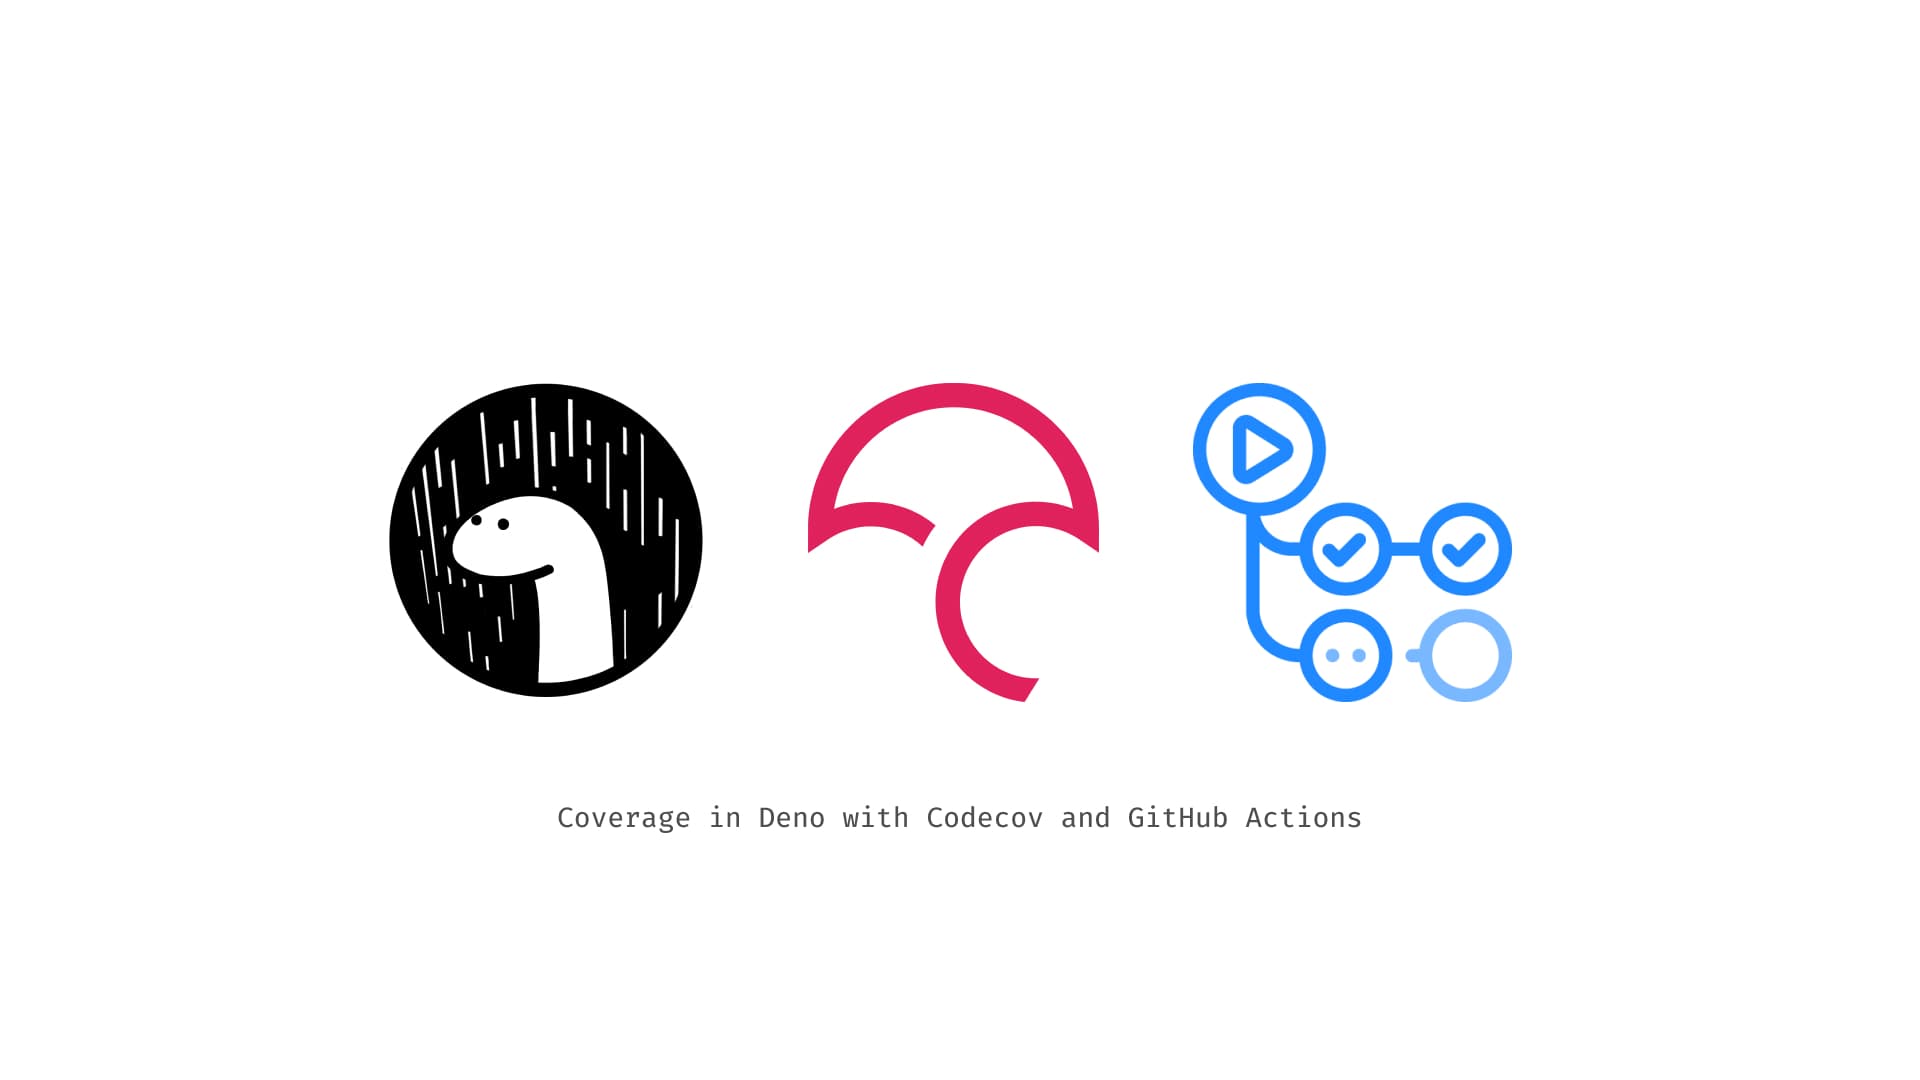 Test coverage in Deno with Codecov and GitHub Actions